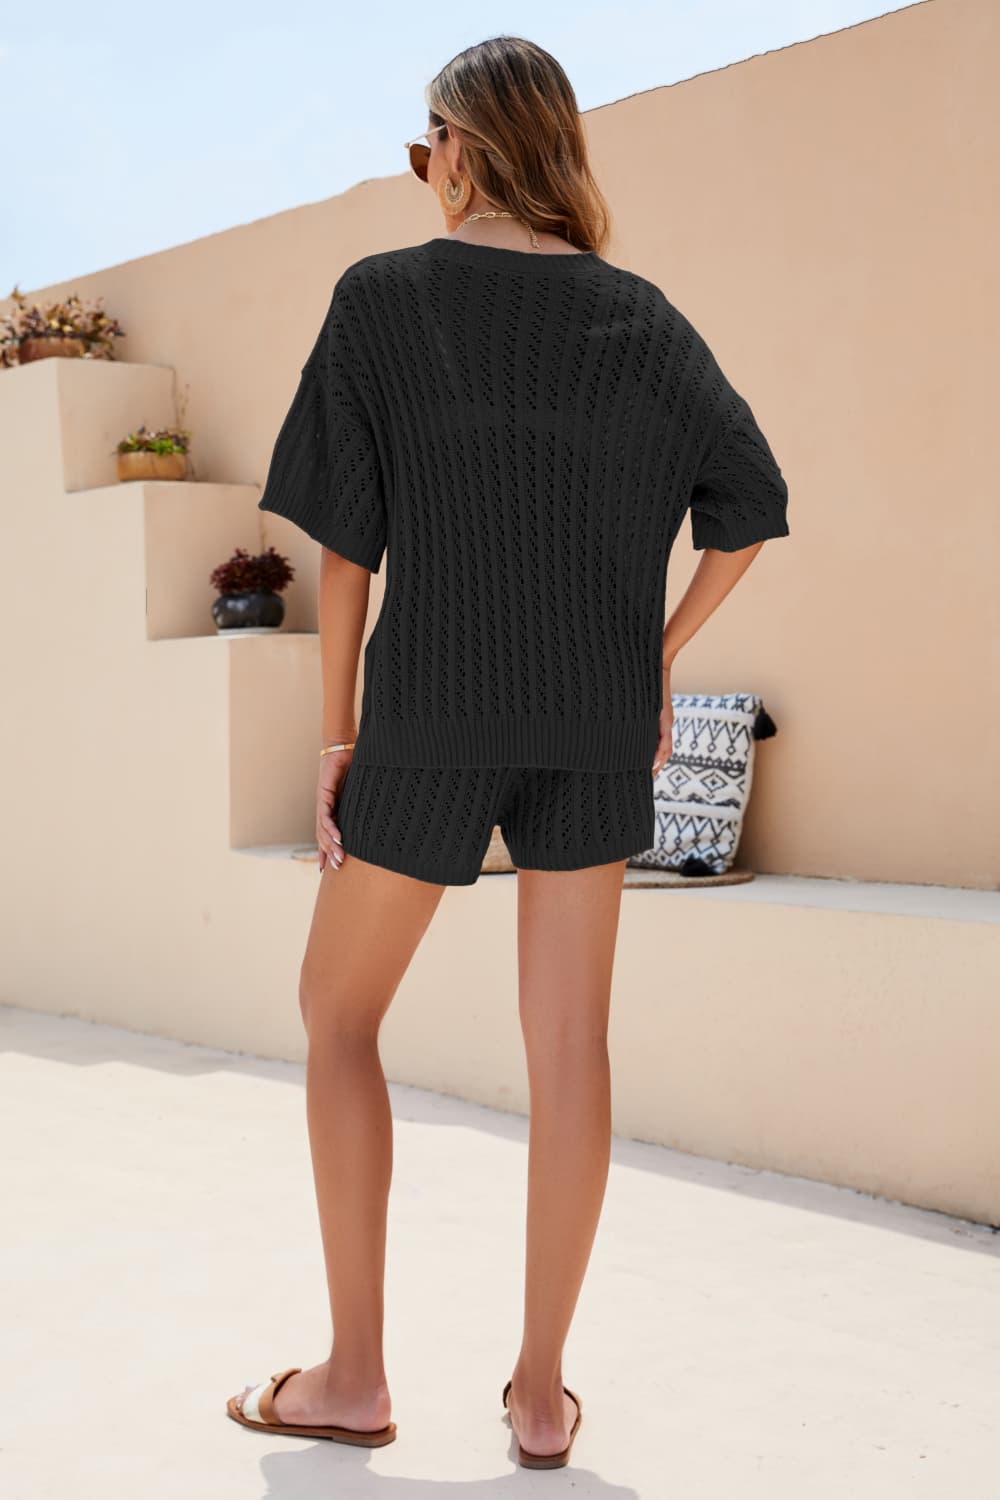 Openwork V-Neck Top and Shorts Set - Fashion Girl Online Store